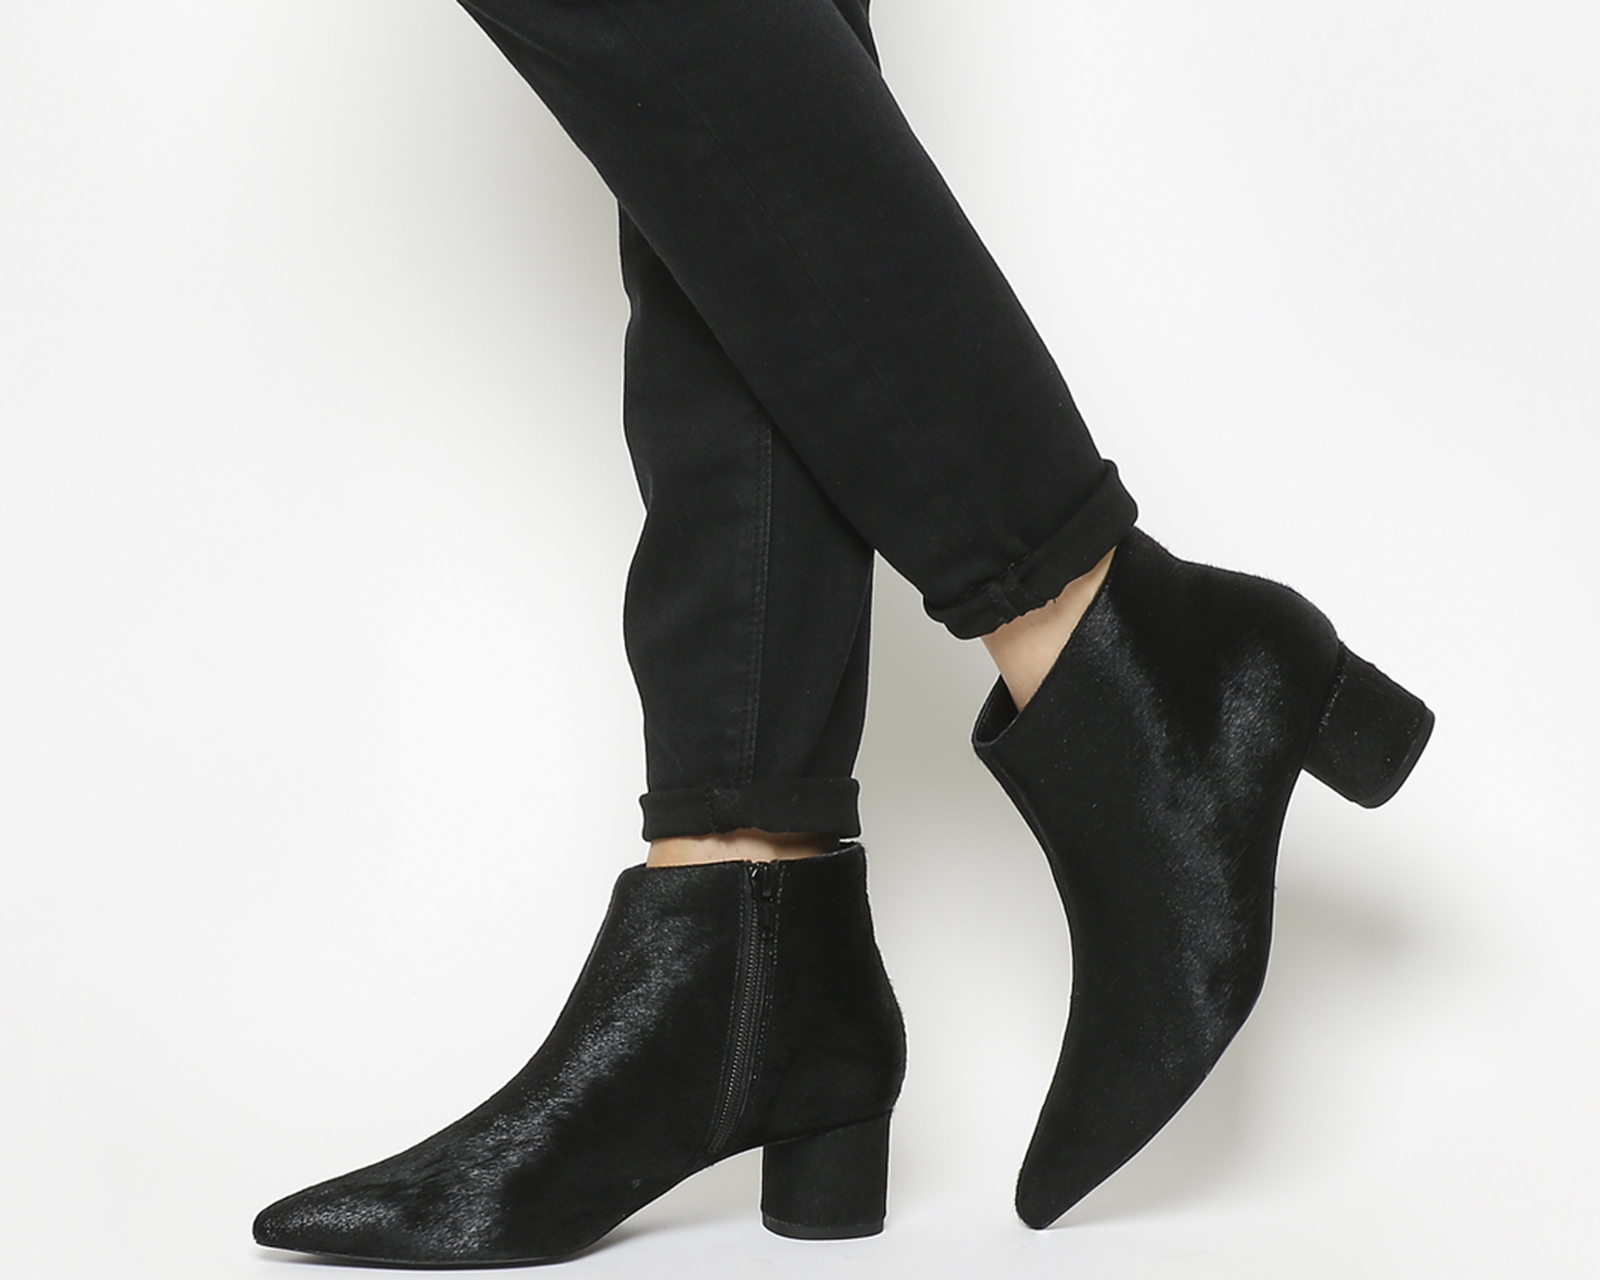 OFFICE Lollipop Pointed Boots Black Pony Effect - Women's Ankle Boots